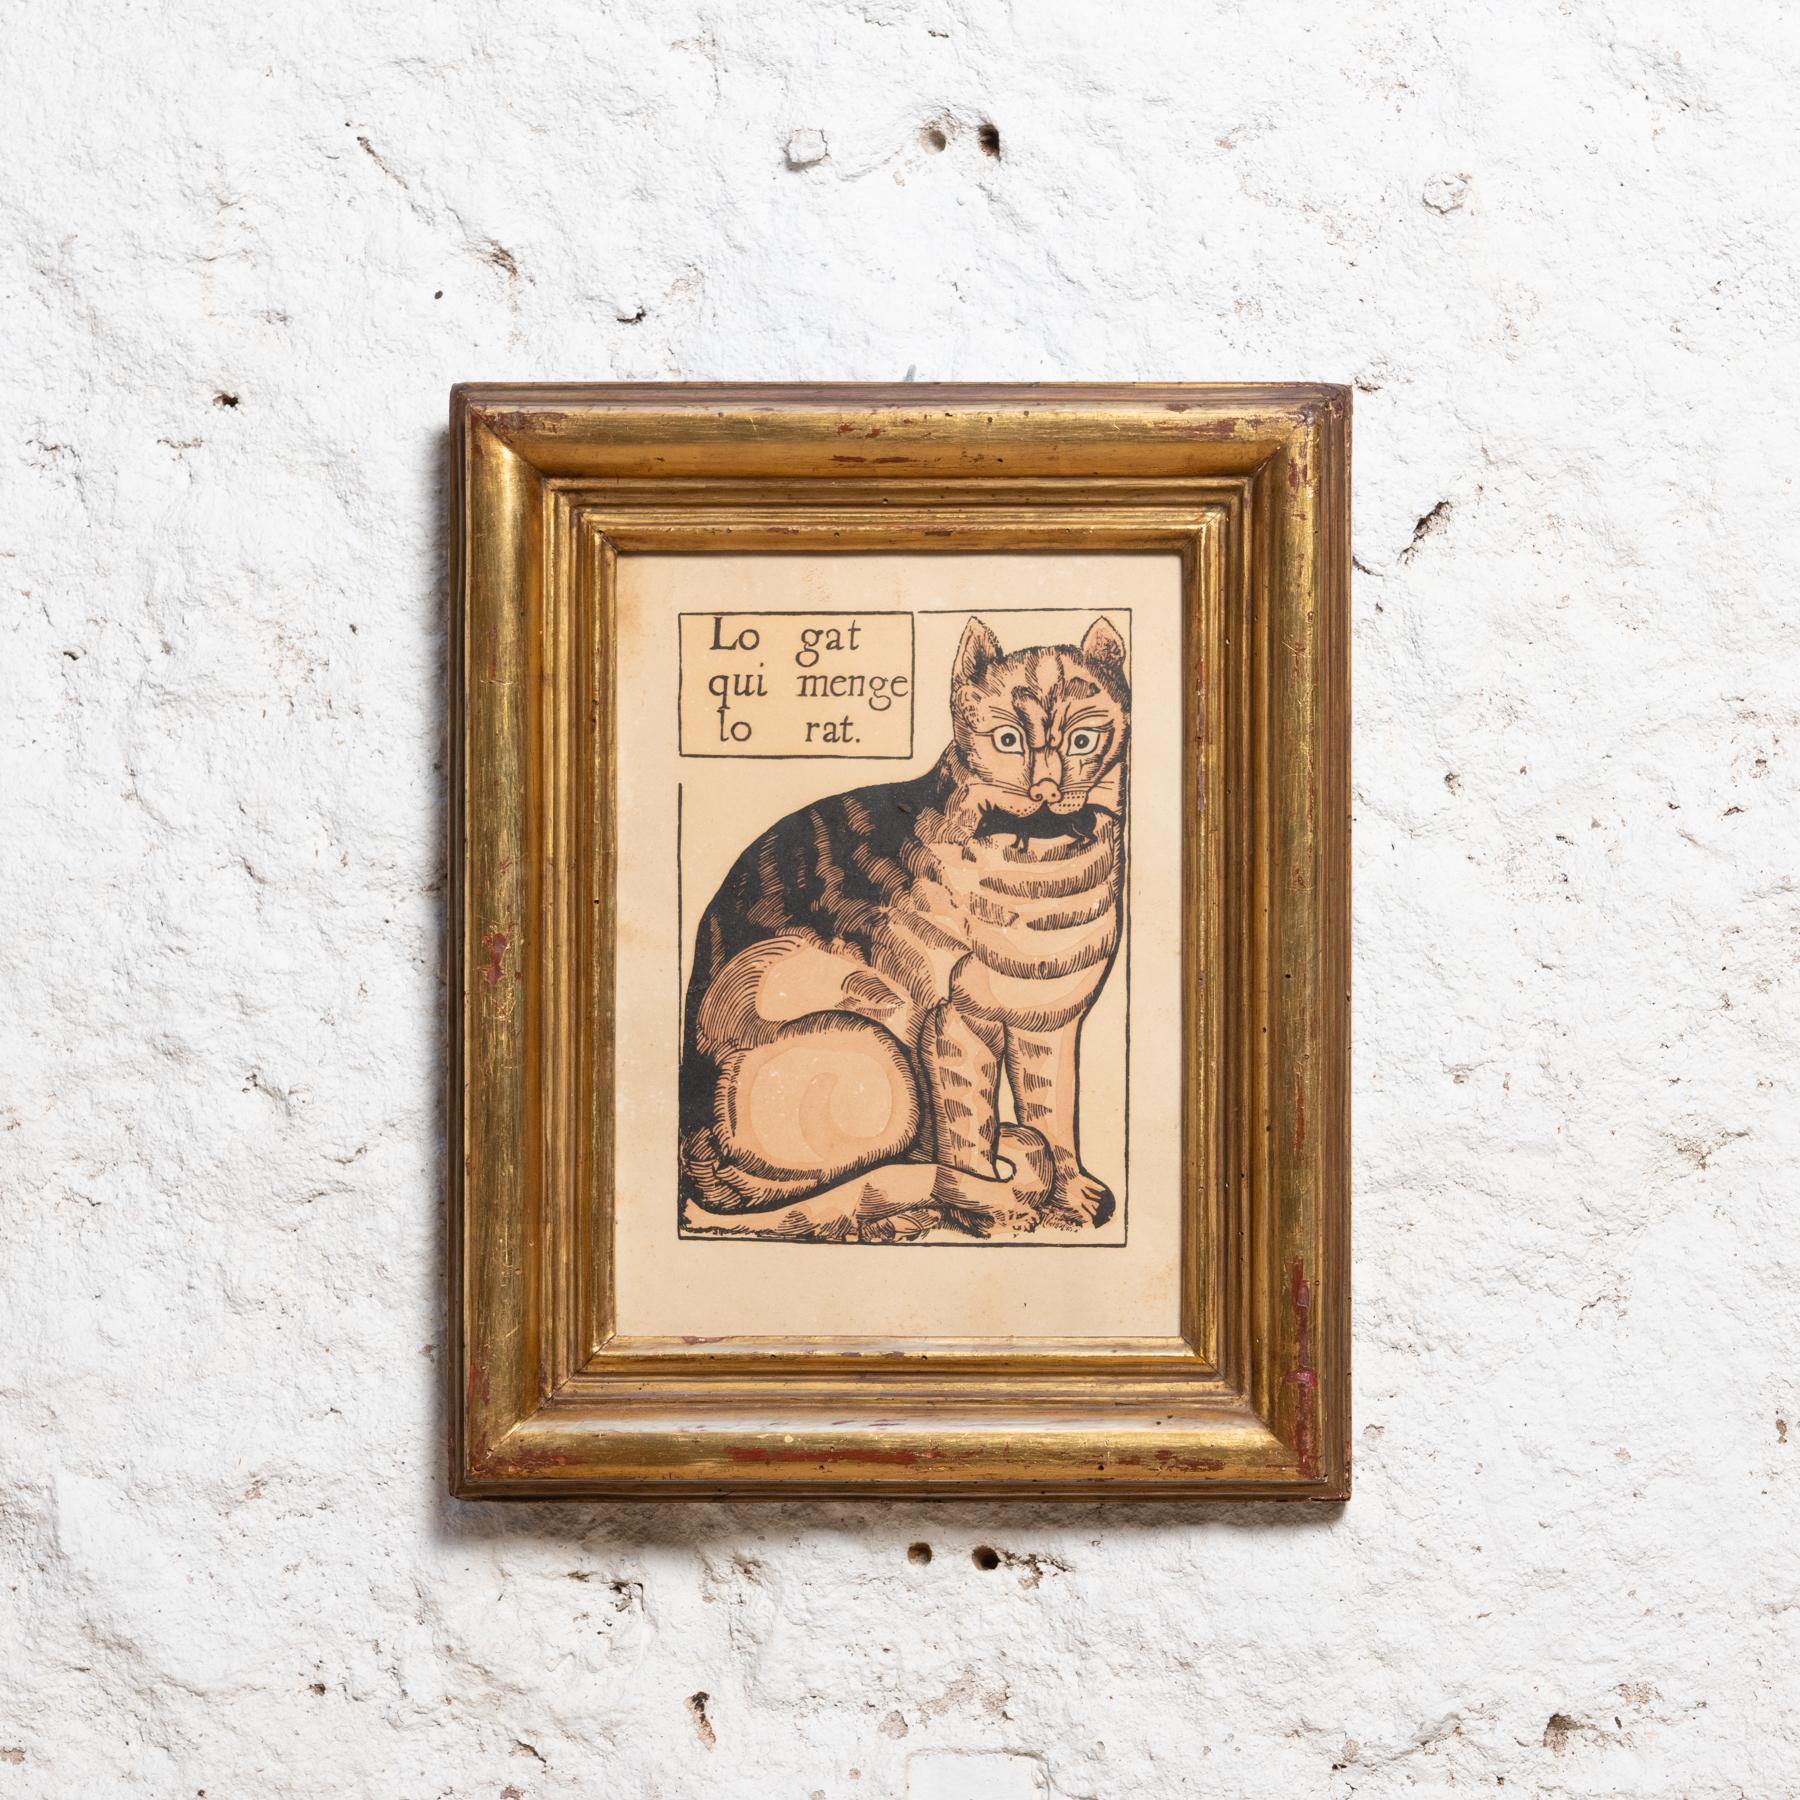 Traditional framed artwork from France, circa 1930

By unknown artist.

In original condition, with minor wear consistent of age and use, preserving a beautiful patina.